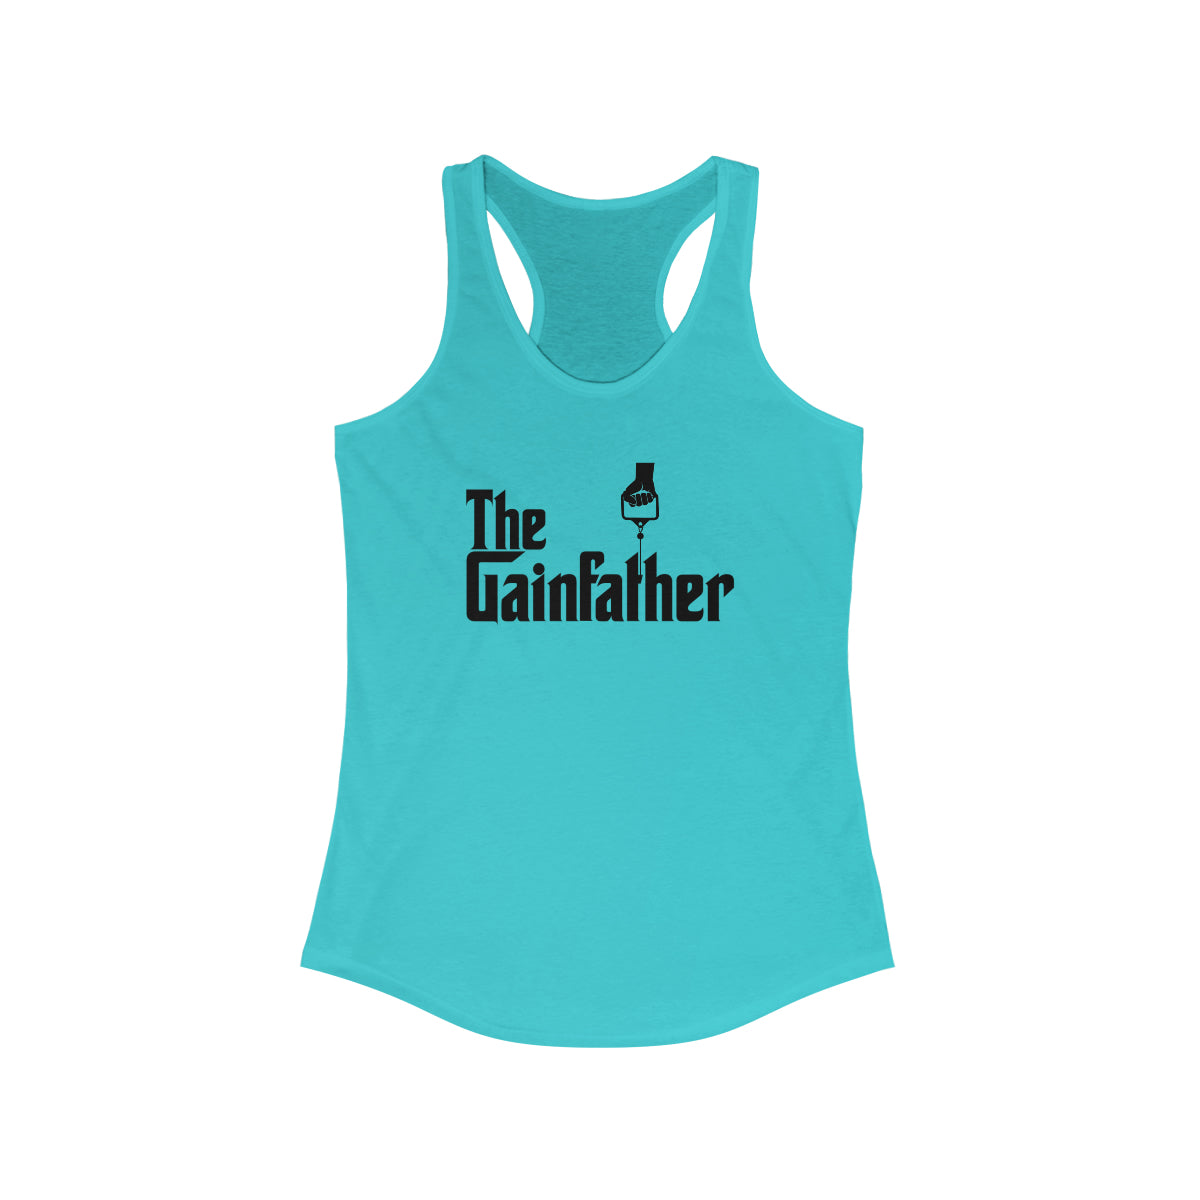 The Gainfather Women's Racerback